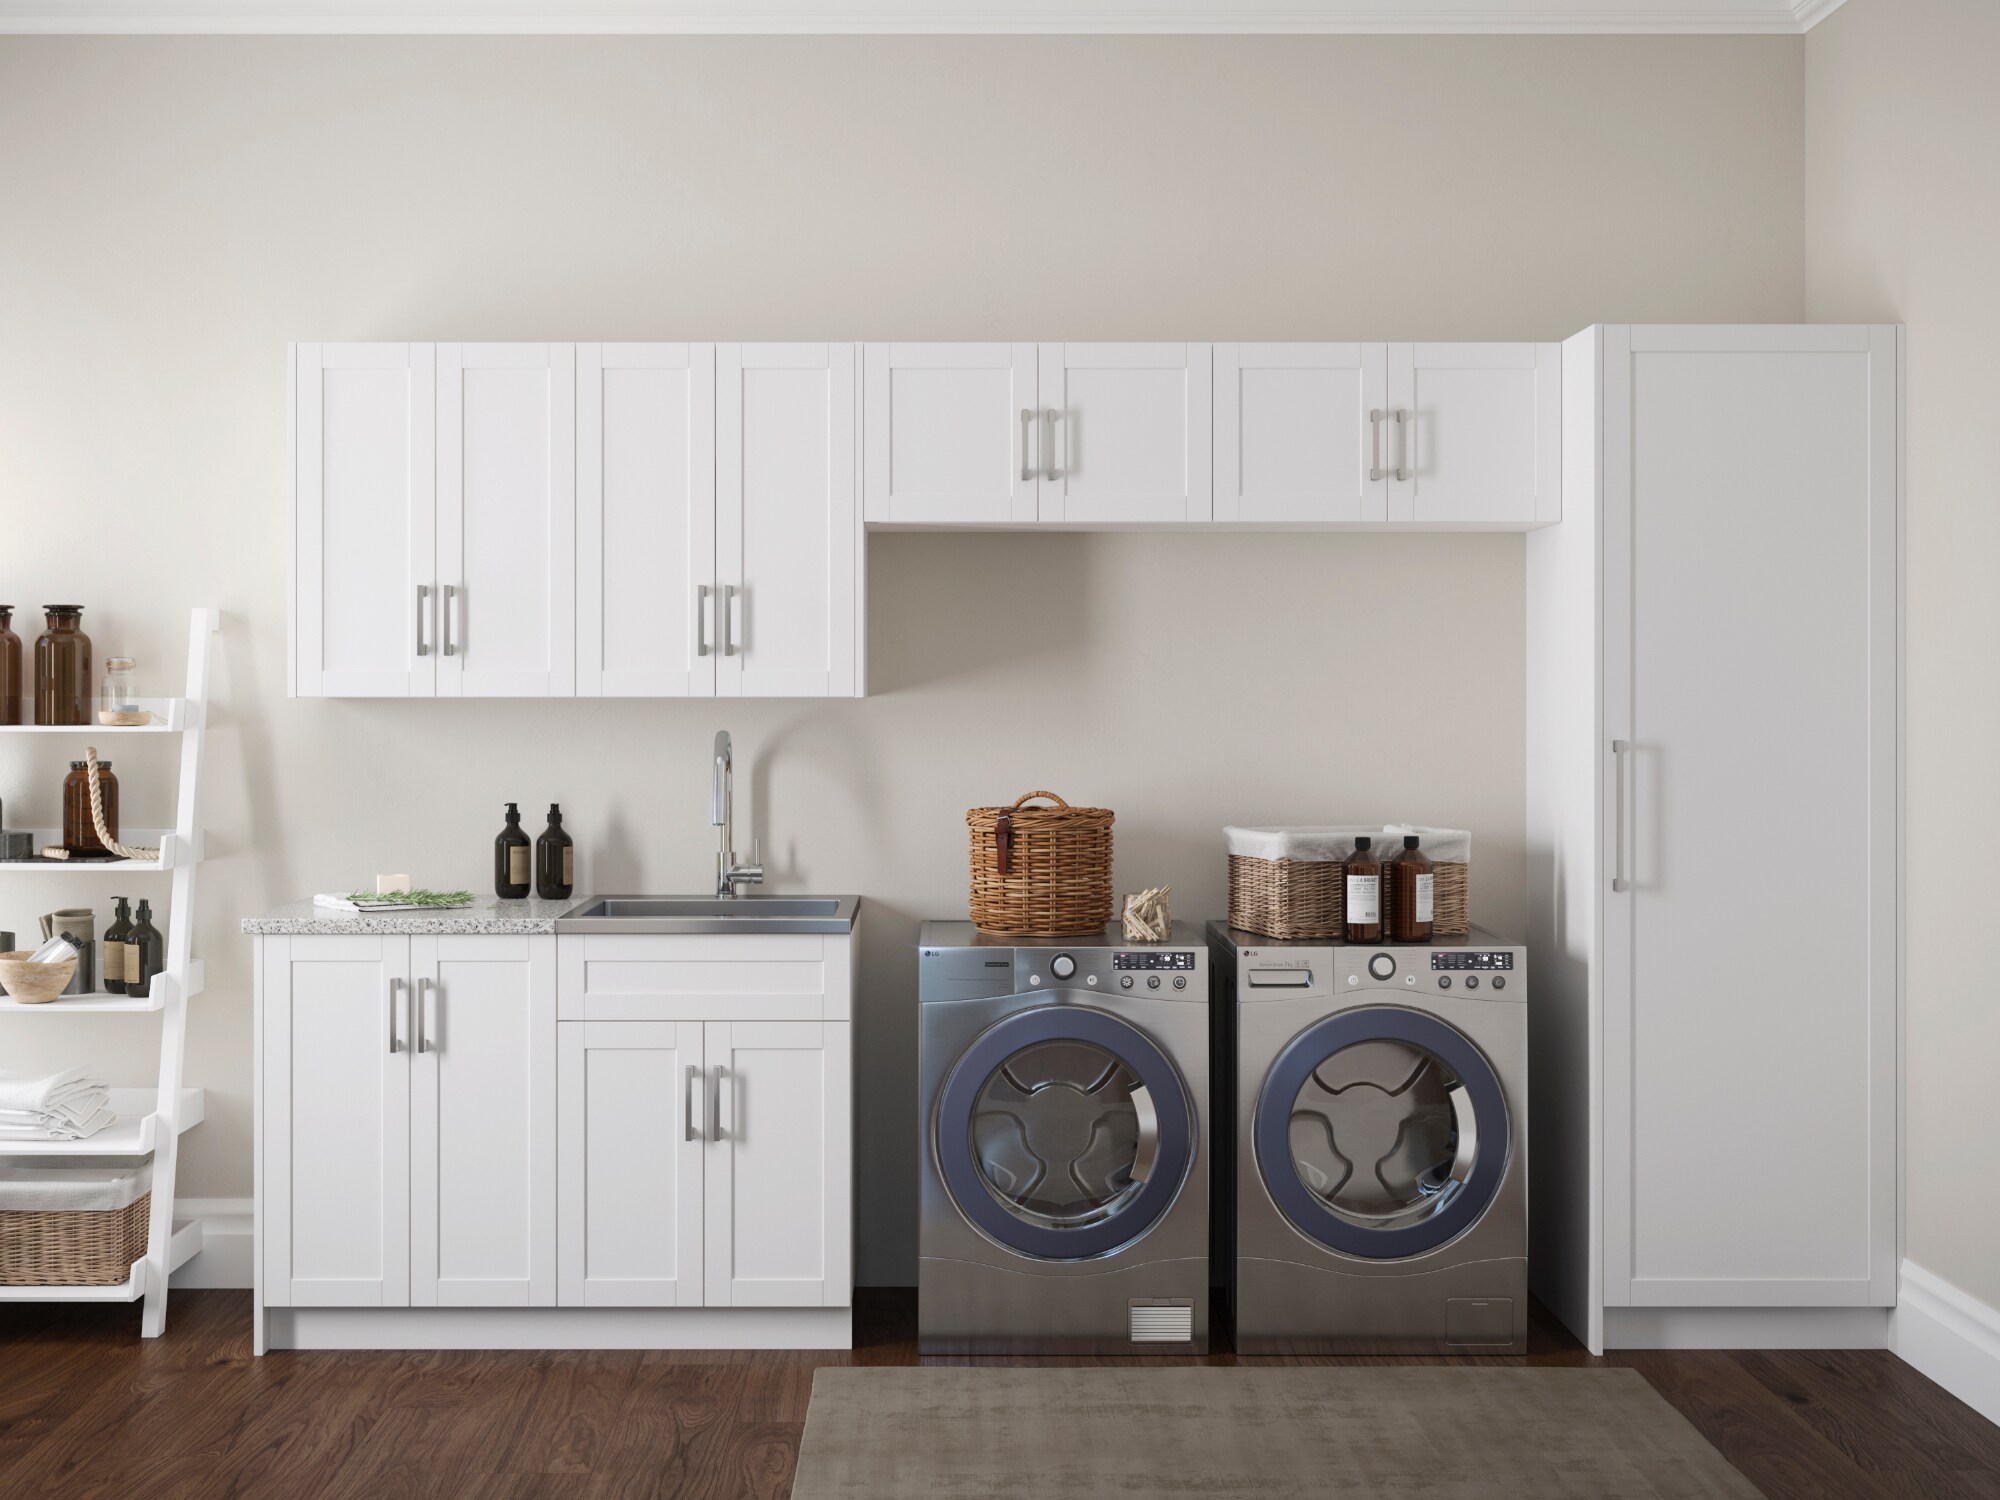 Details about   Modular Laundry and Utility Room Wall Storage Set w/ Accessories 20 Piece White 